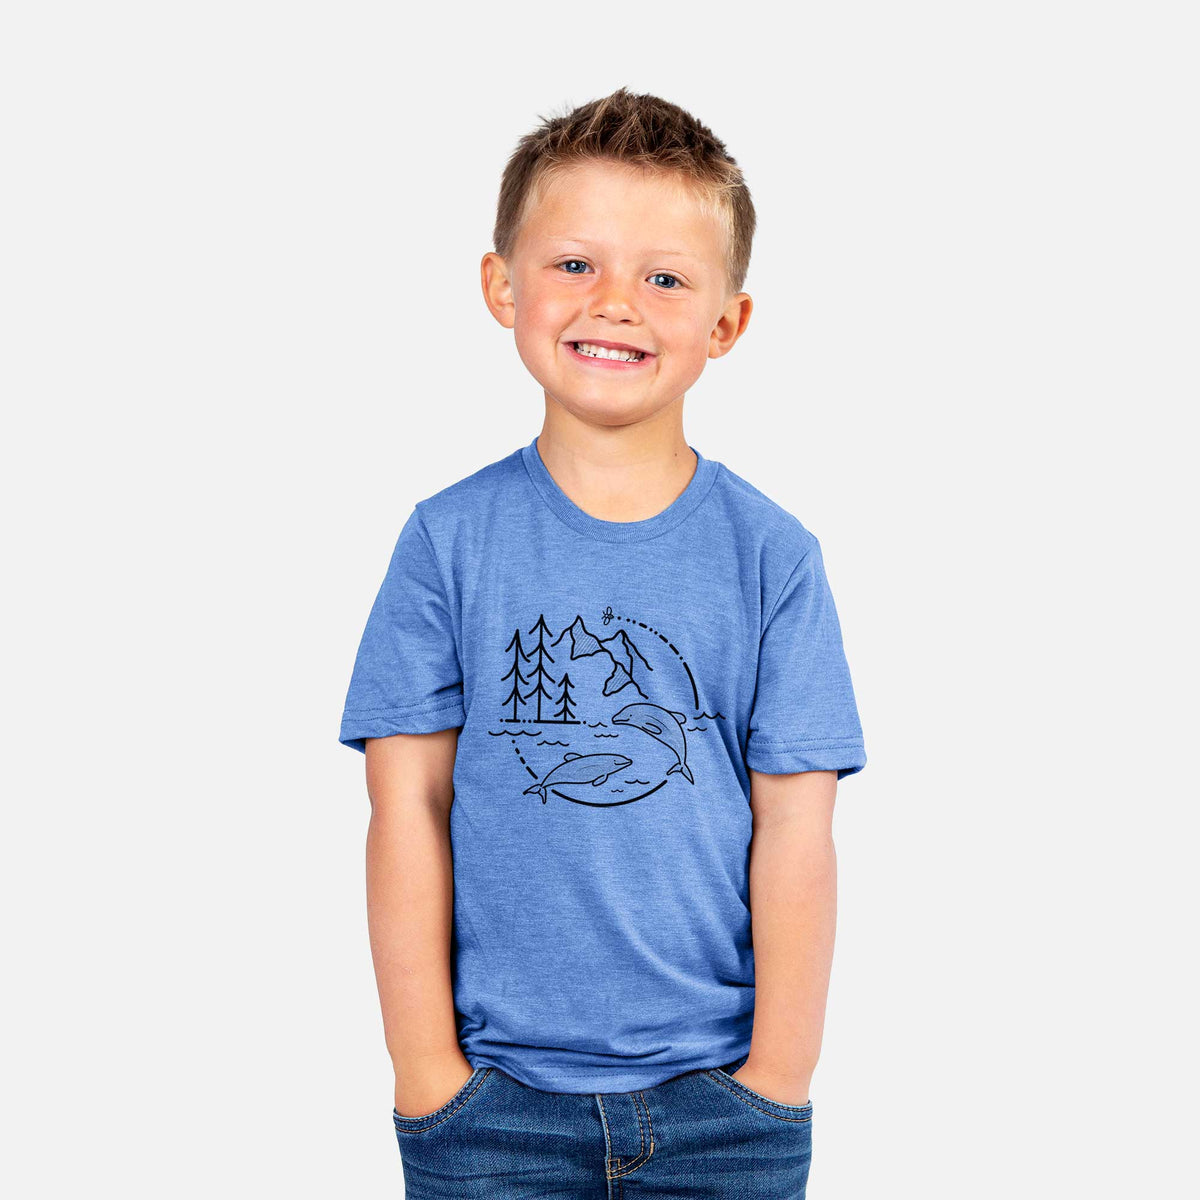 It&#39;s All Connected - Maui Dolphins - Kids Shirt